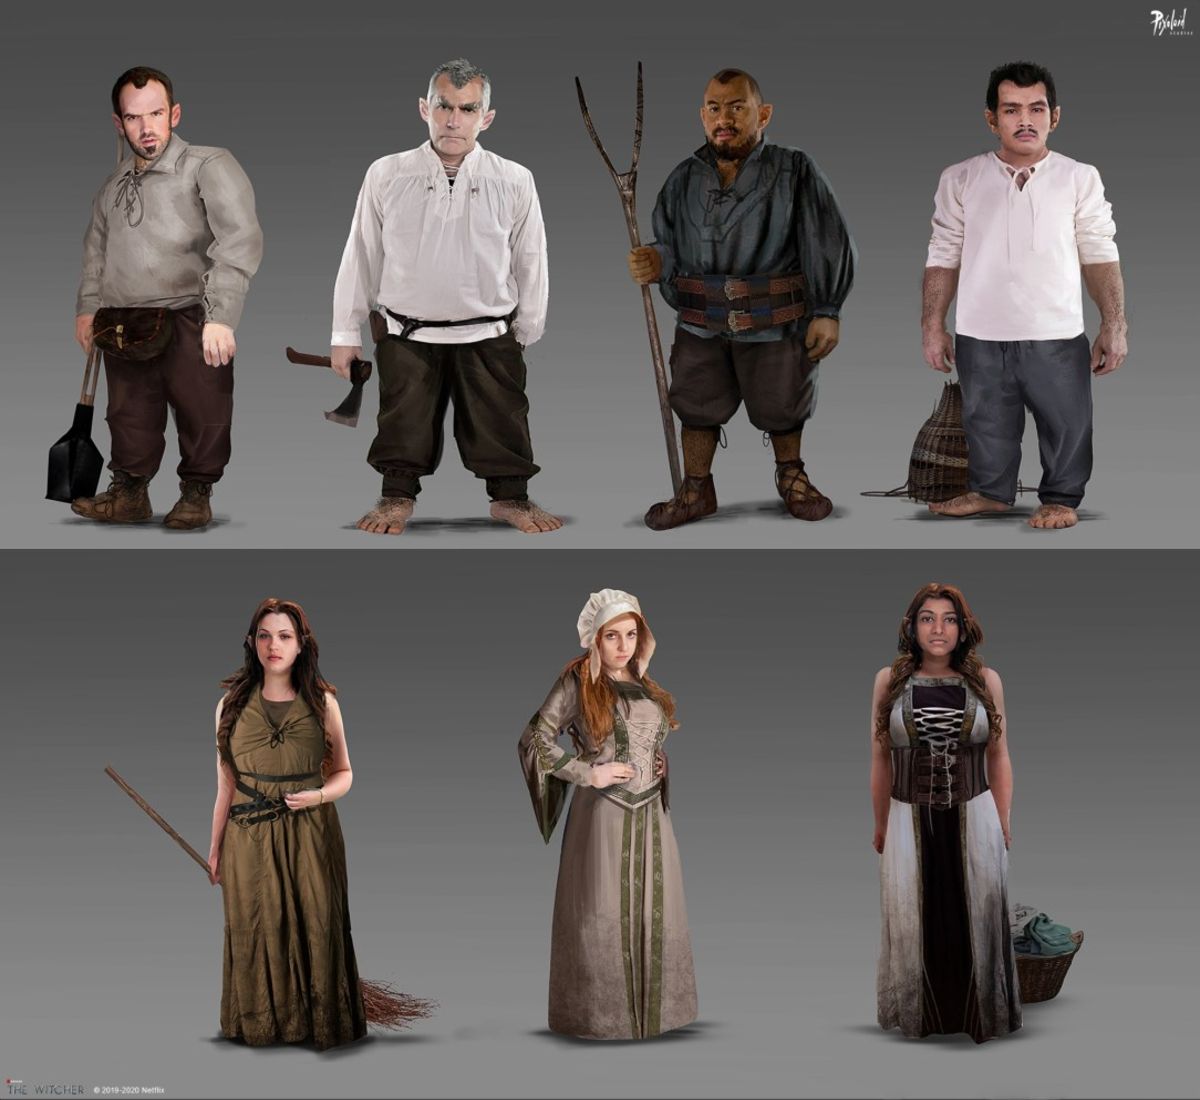 Concept art for halflings by Pixoloid Studios for The Witcher series on Netflix